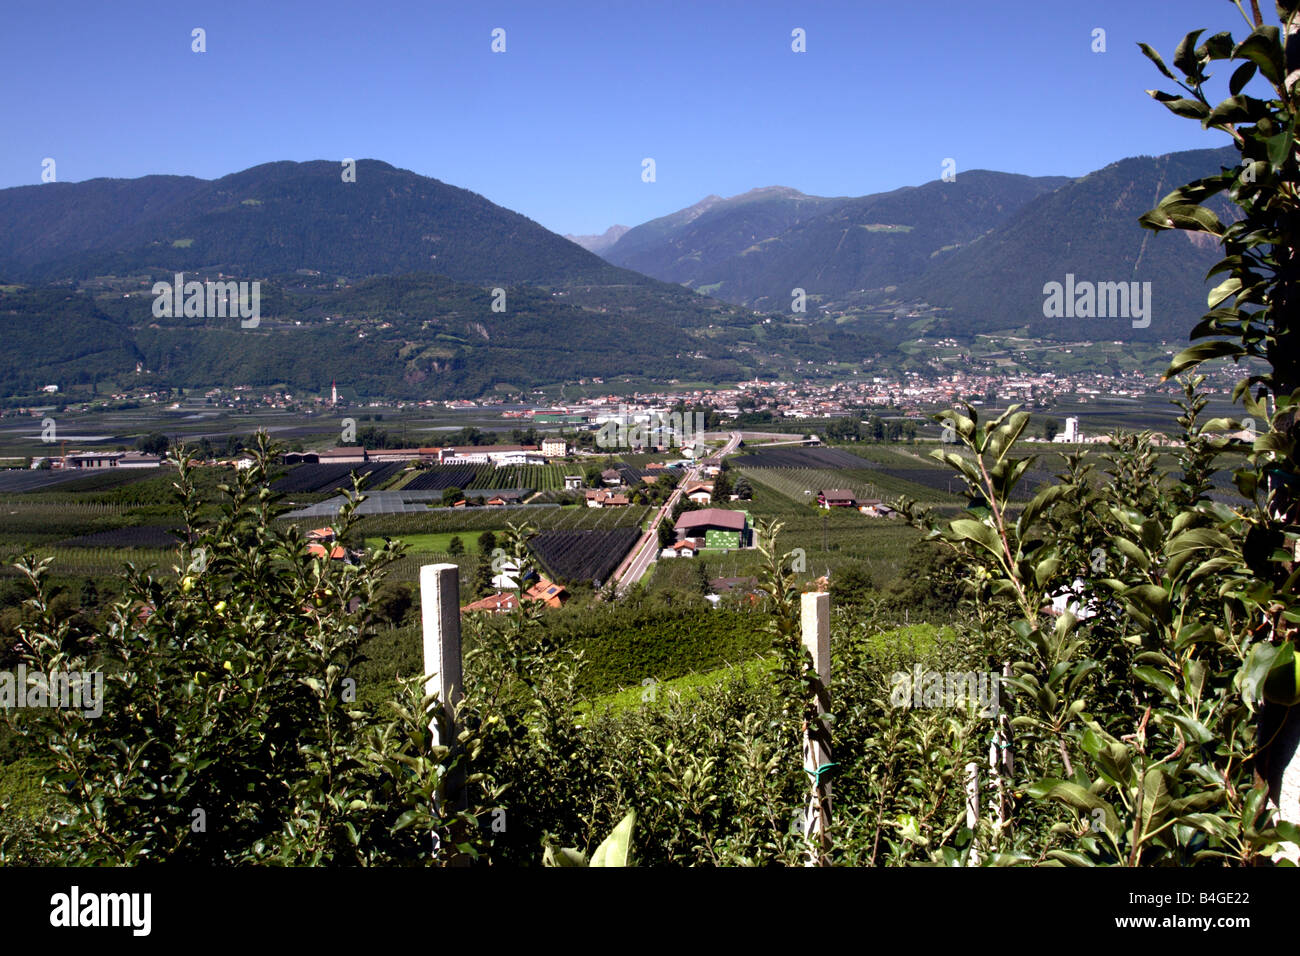 View from orchards above town of Postal-Burgstall to Lana, in South Tyrol region, Italy Stock Photo